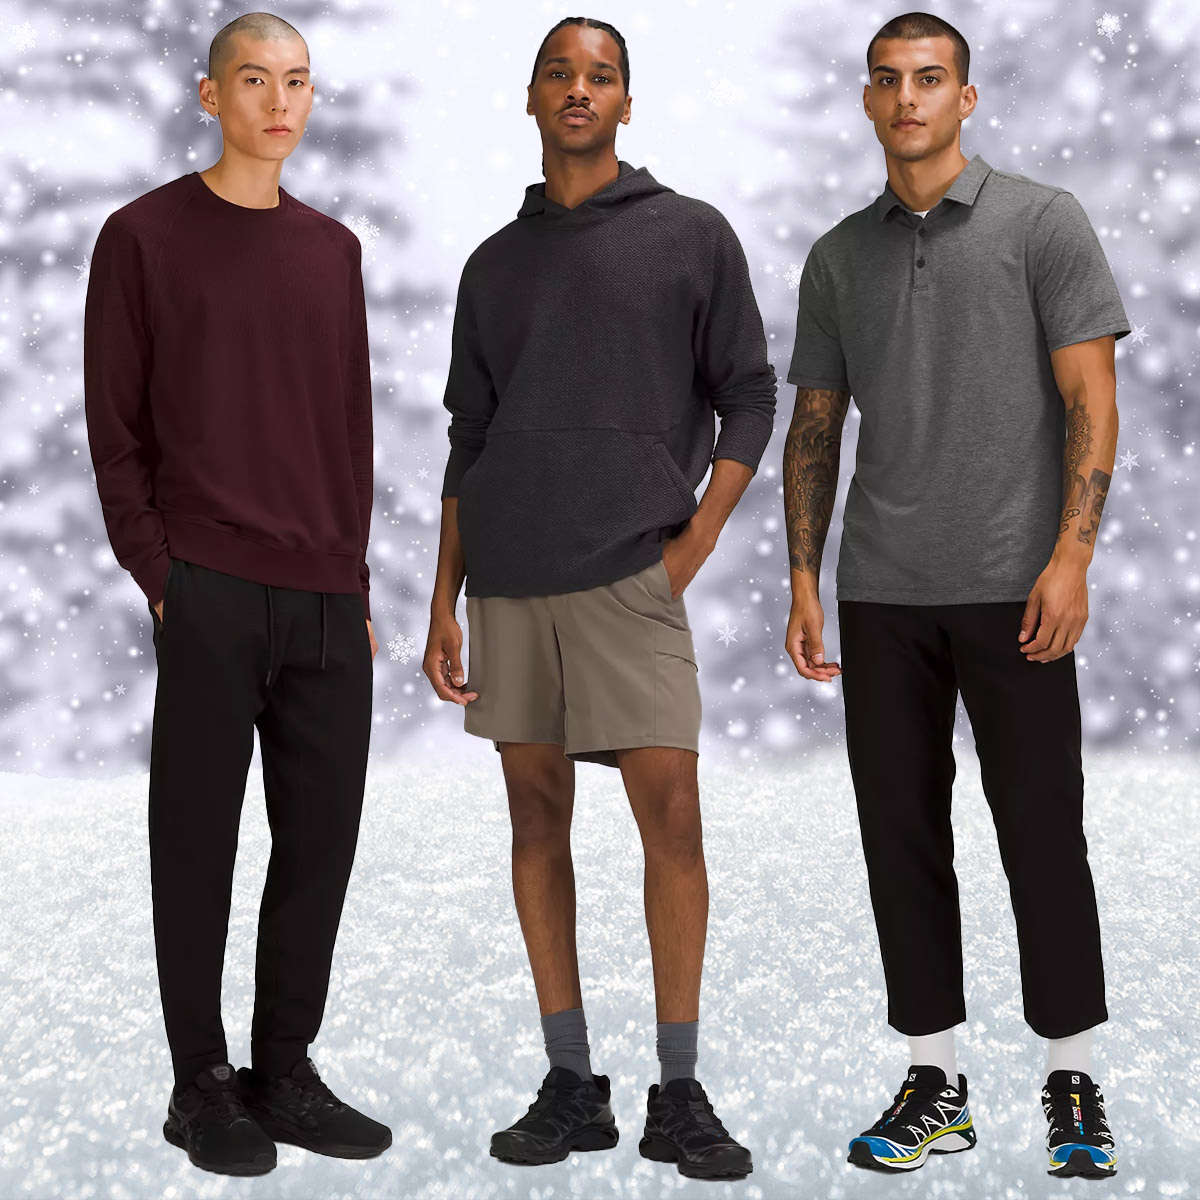 https://akns-images.eonline.com/eol_images/Entire_Site/2022926/rs_1200x1200-221026111034-1200-holiday-gift-guide-lululemon-men.jpg?fit=around%7C1080:1080&output-quality=90&crop=1080:1080;center,top